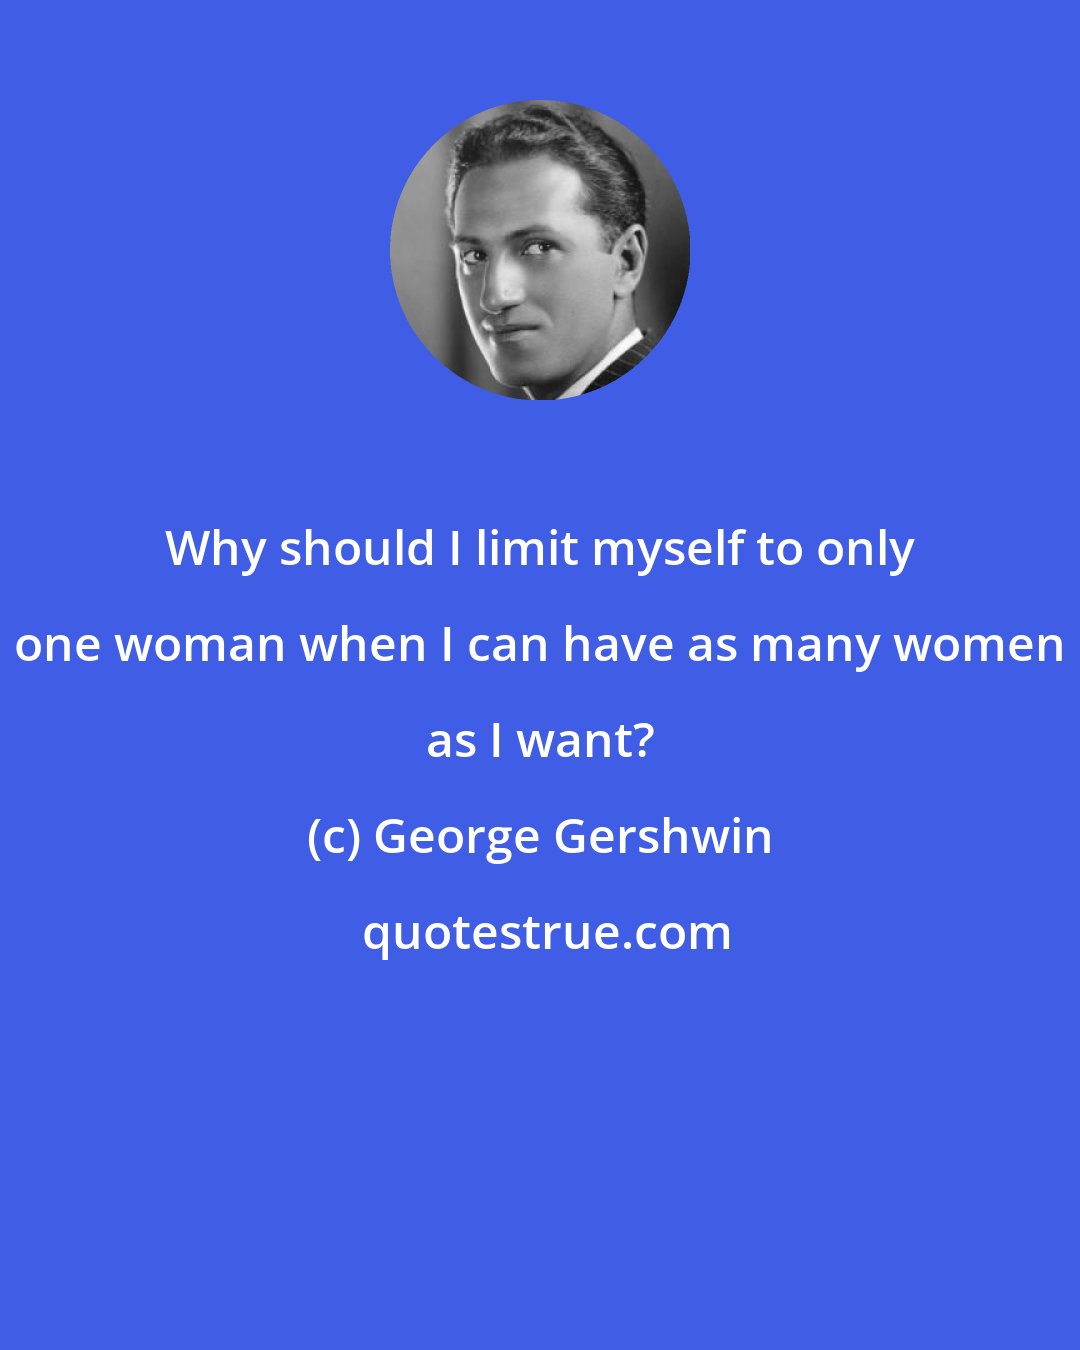 George Gershwin: Why should I limit myself to only one woman when I can have as many women as I want?